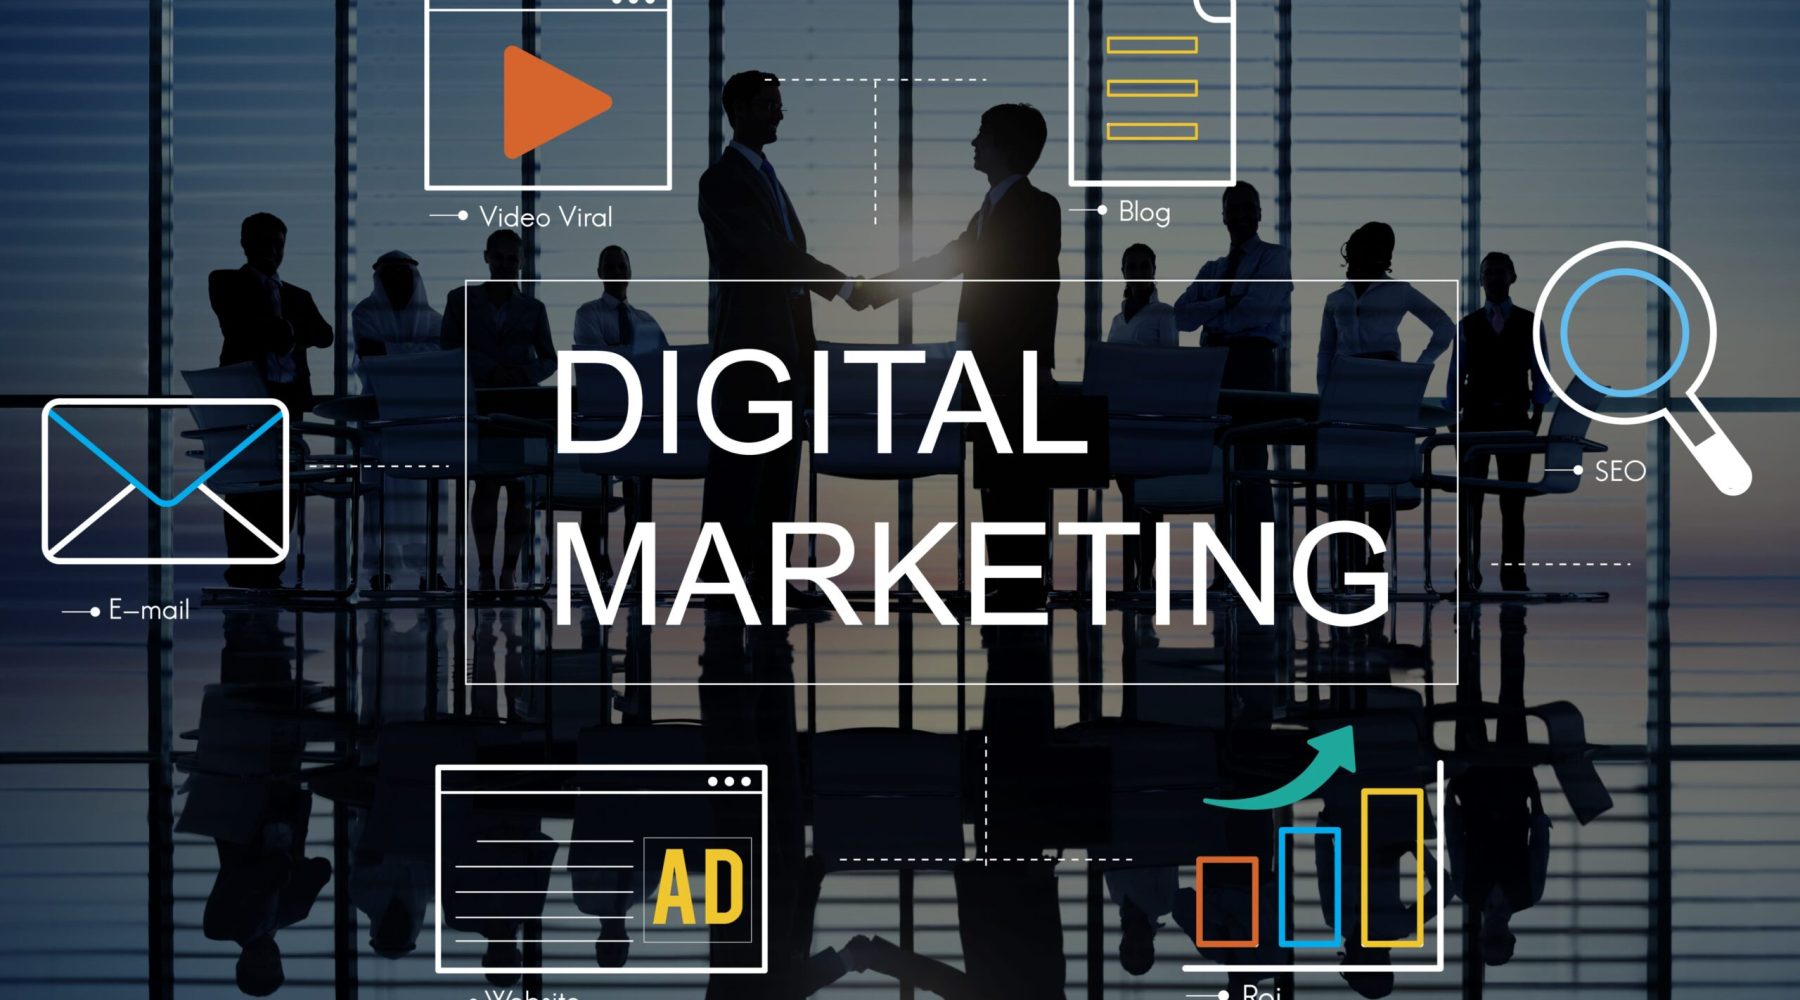 digital-marketing-with-icons-business-people